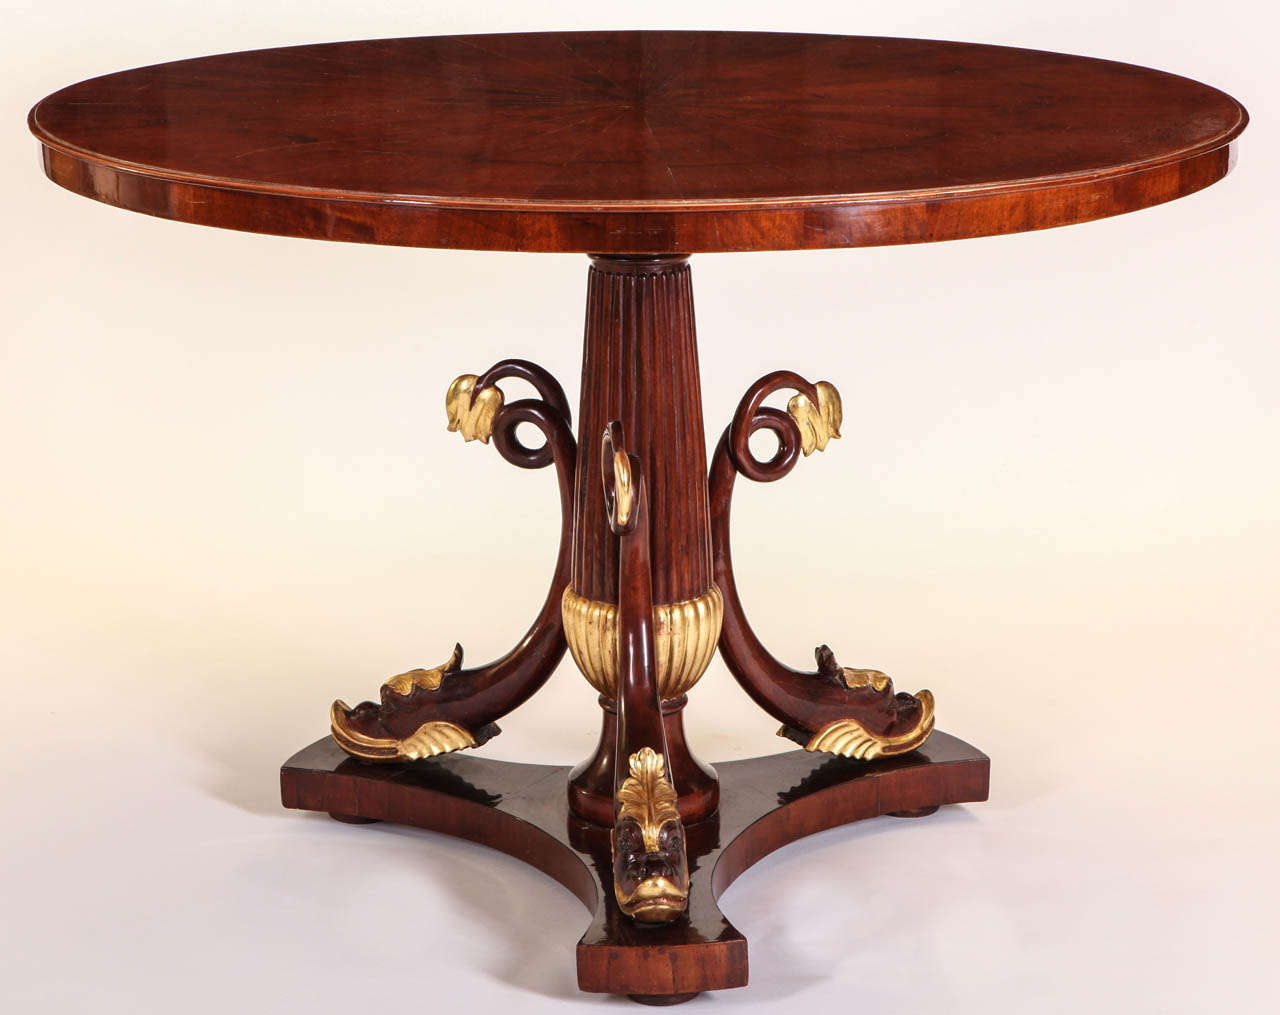 An Italian mahogany and parcel-gilt centre table with a circular top above triple addorsed dolphins on a triform base,

Tuscany, 1830.